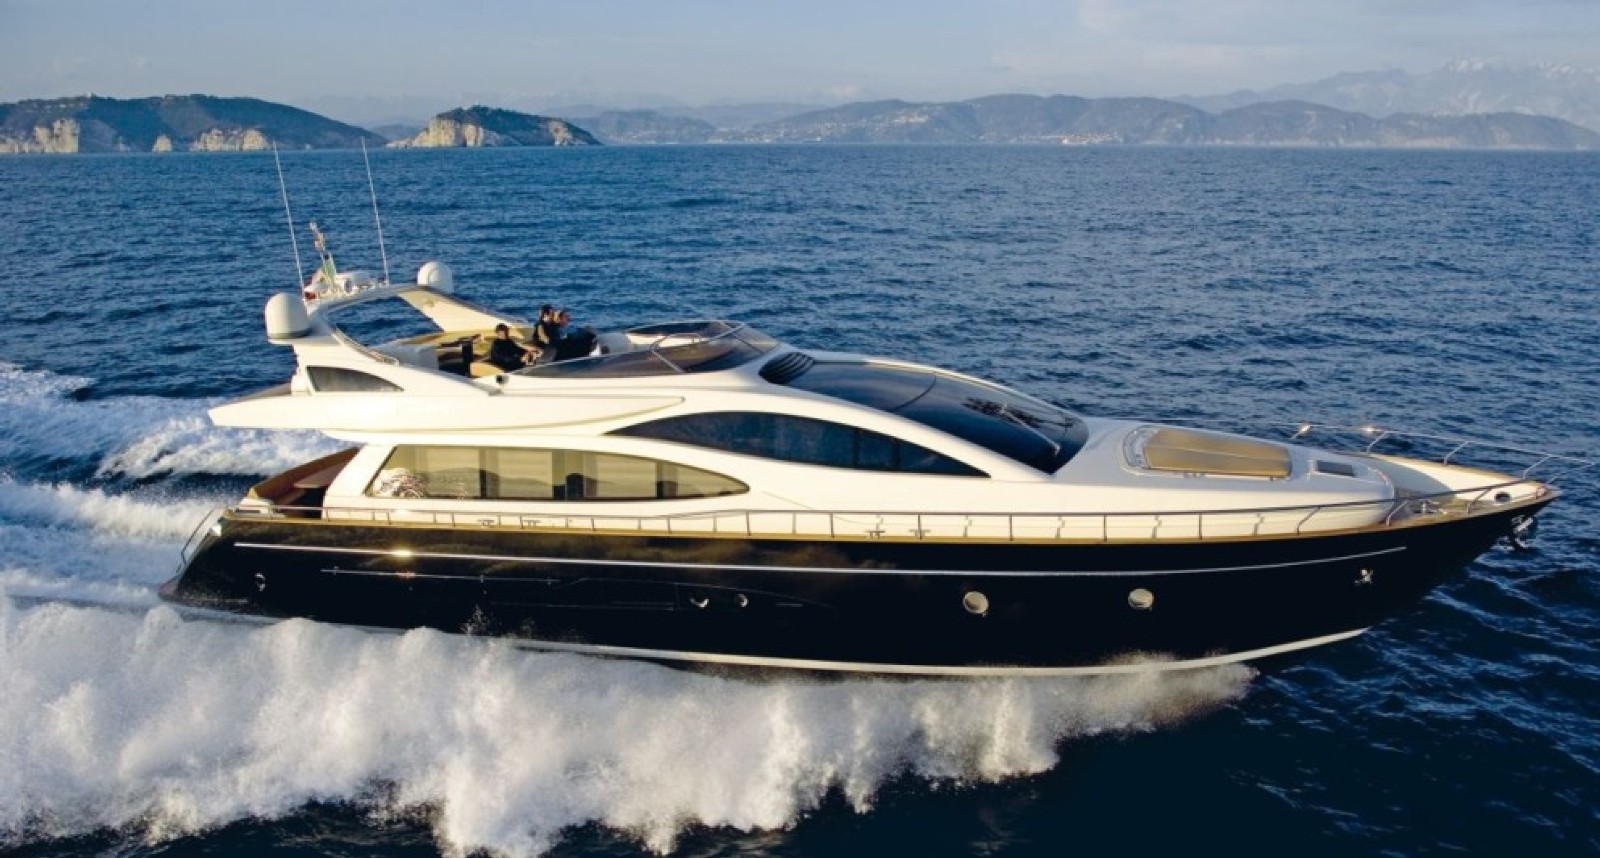 VENERE - Yacht Charter Antibes & Boat hire in France French Riviera Antibes 1